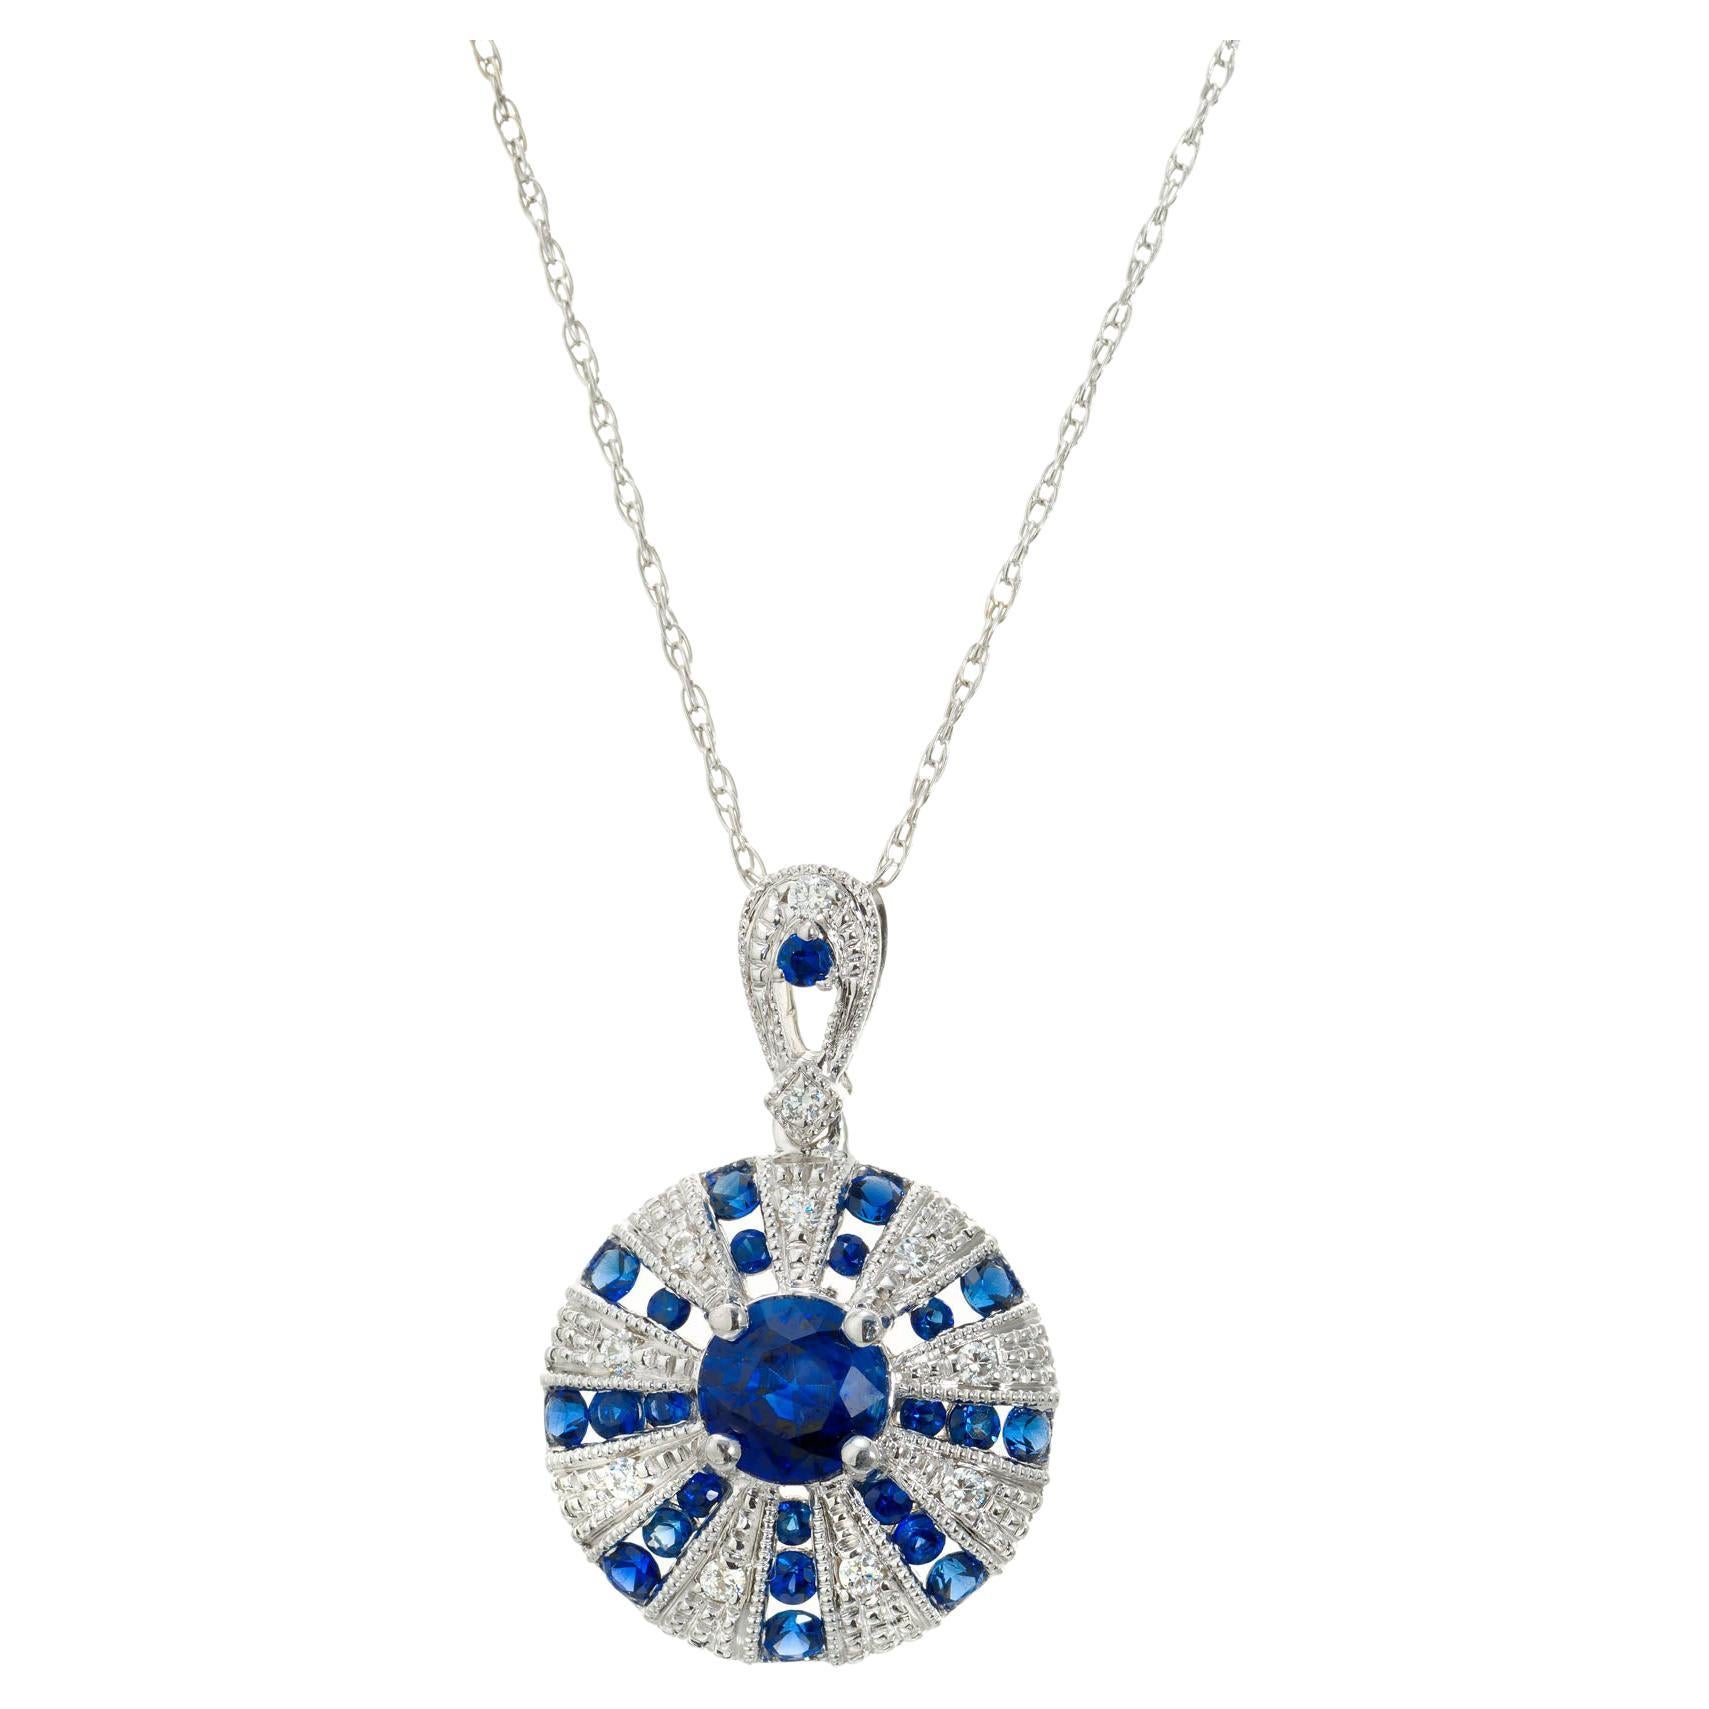 Peter Suchy 1.05 Blue Sapphire Diamond White Gold Pendant Necklace For Sale